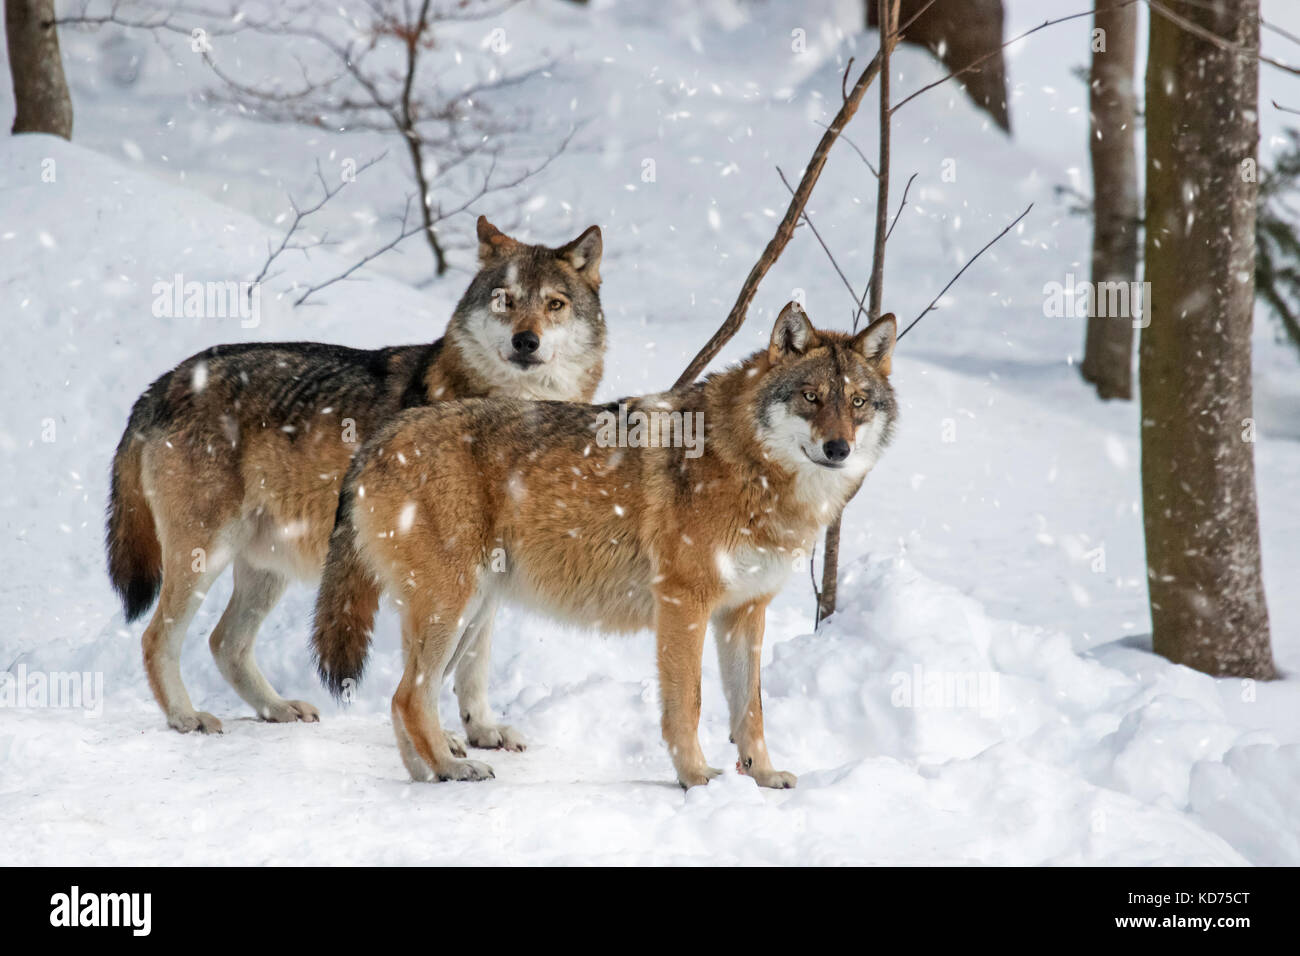 Two gray wolves / grey wolves (Canis lupus) in the snow during snowfall in forest in winter Stock Photo